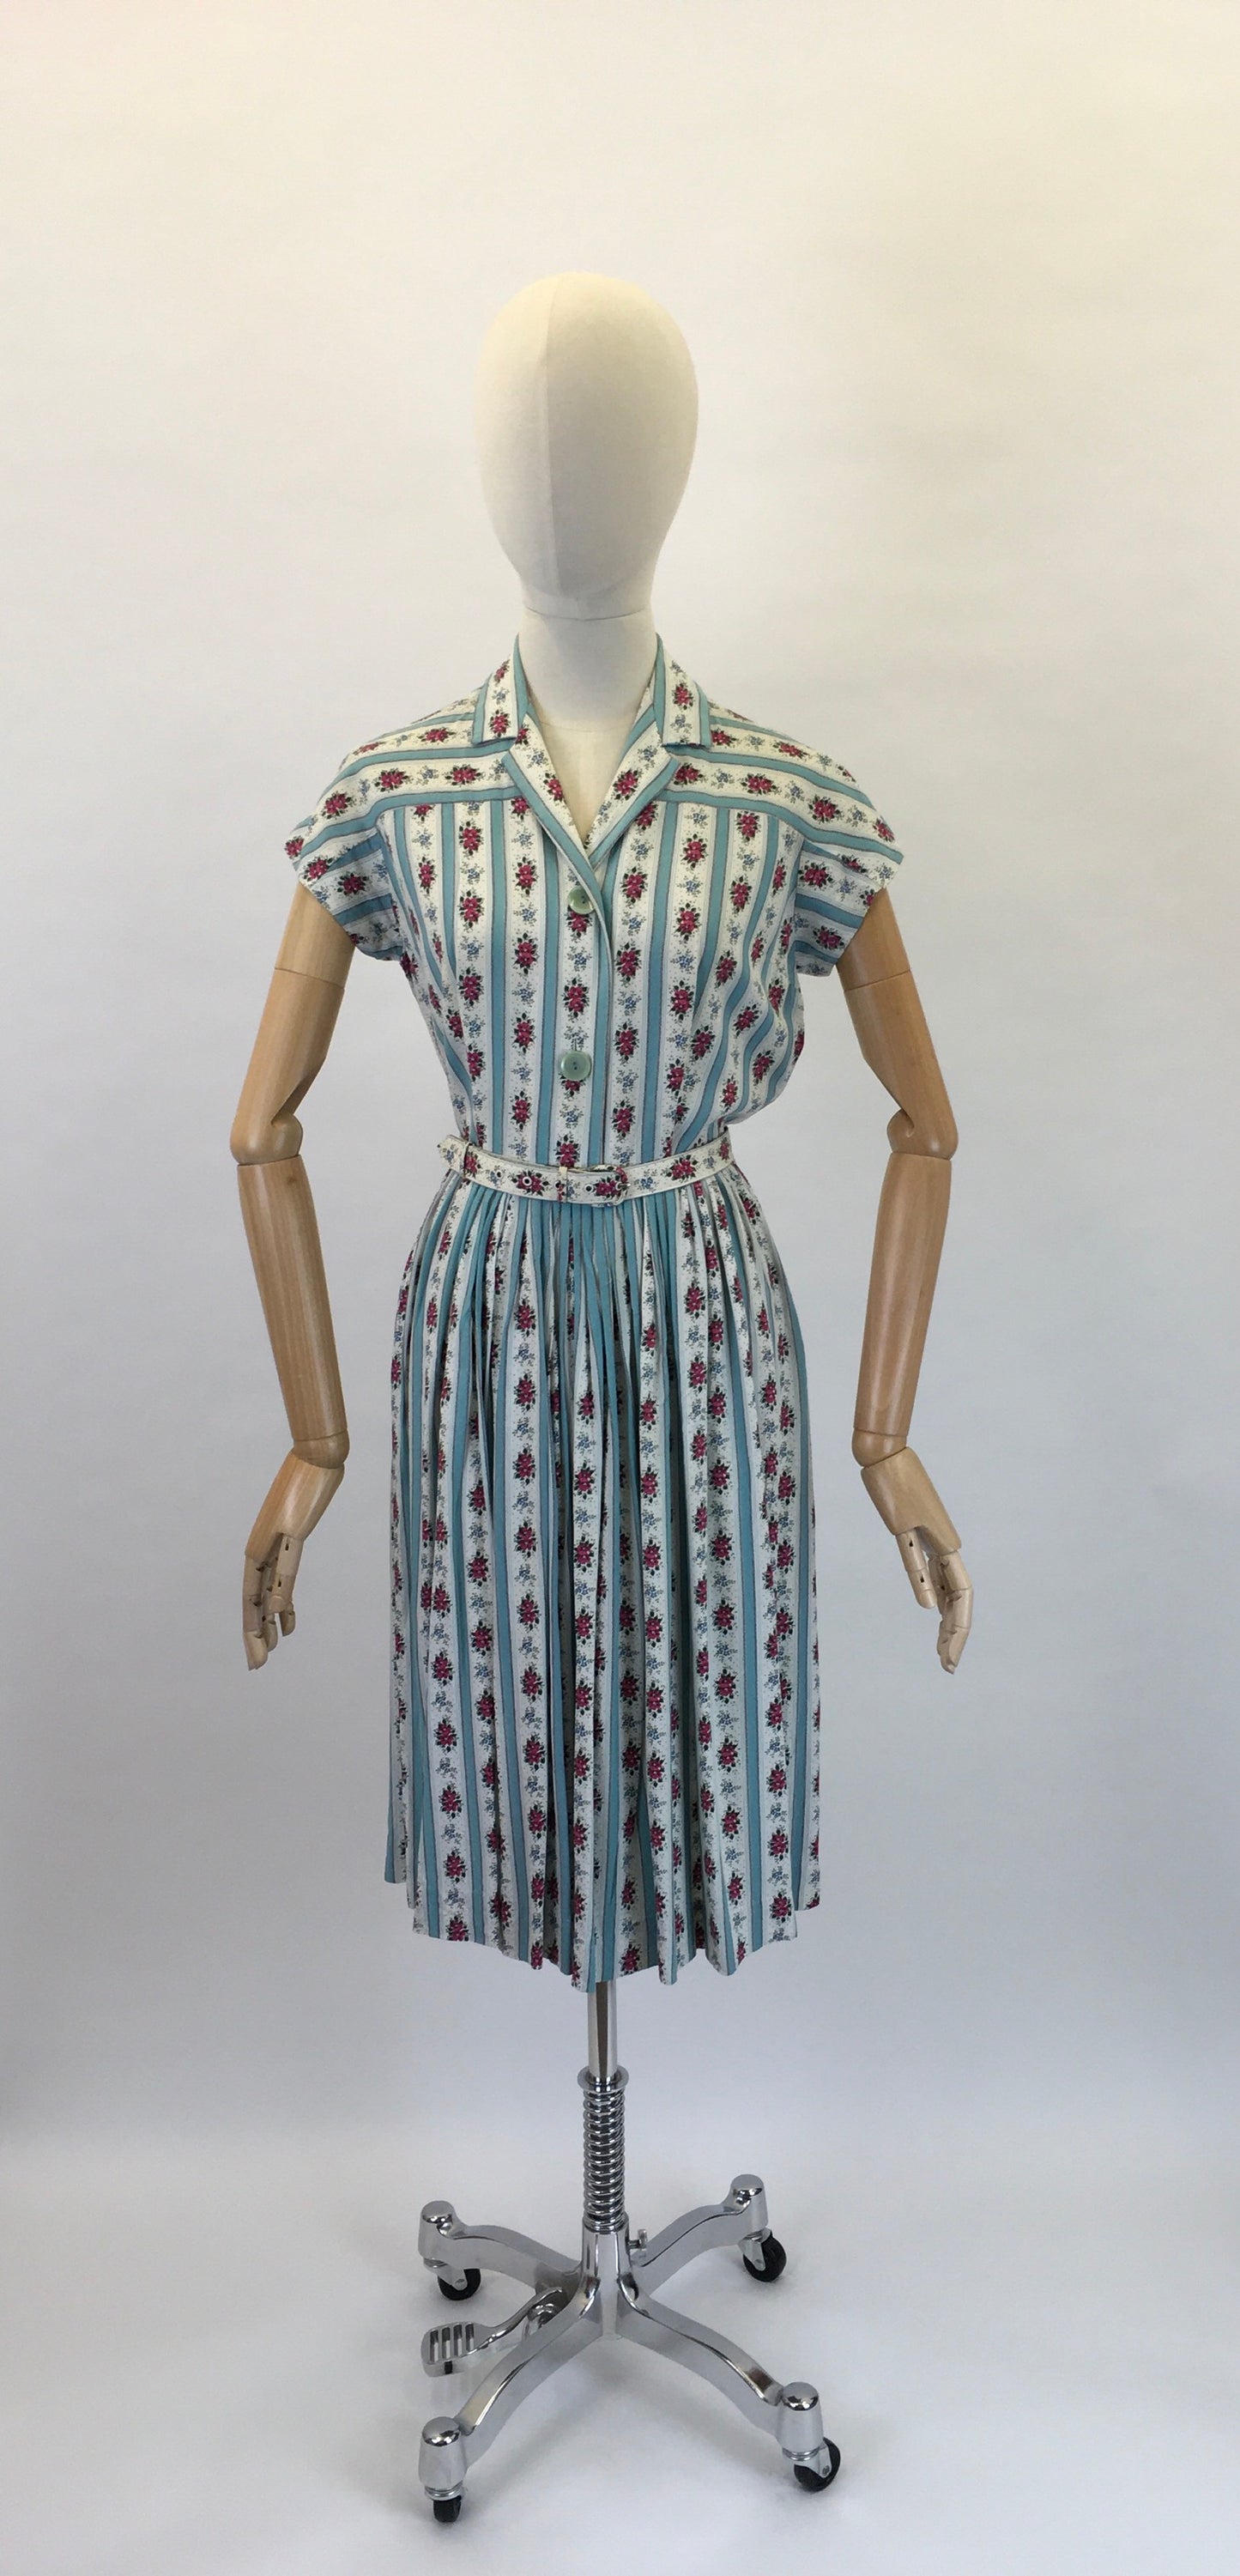 Original 1950’s ‘ St. Michael’ Floral Cotton Day Dress - In Beautiful Blues, Pinks, Greens and Whites